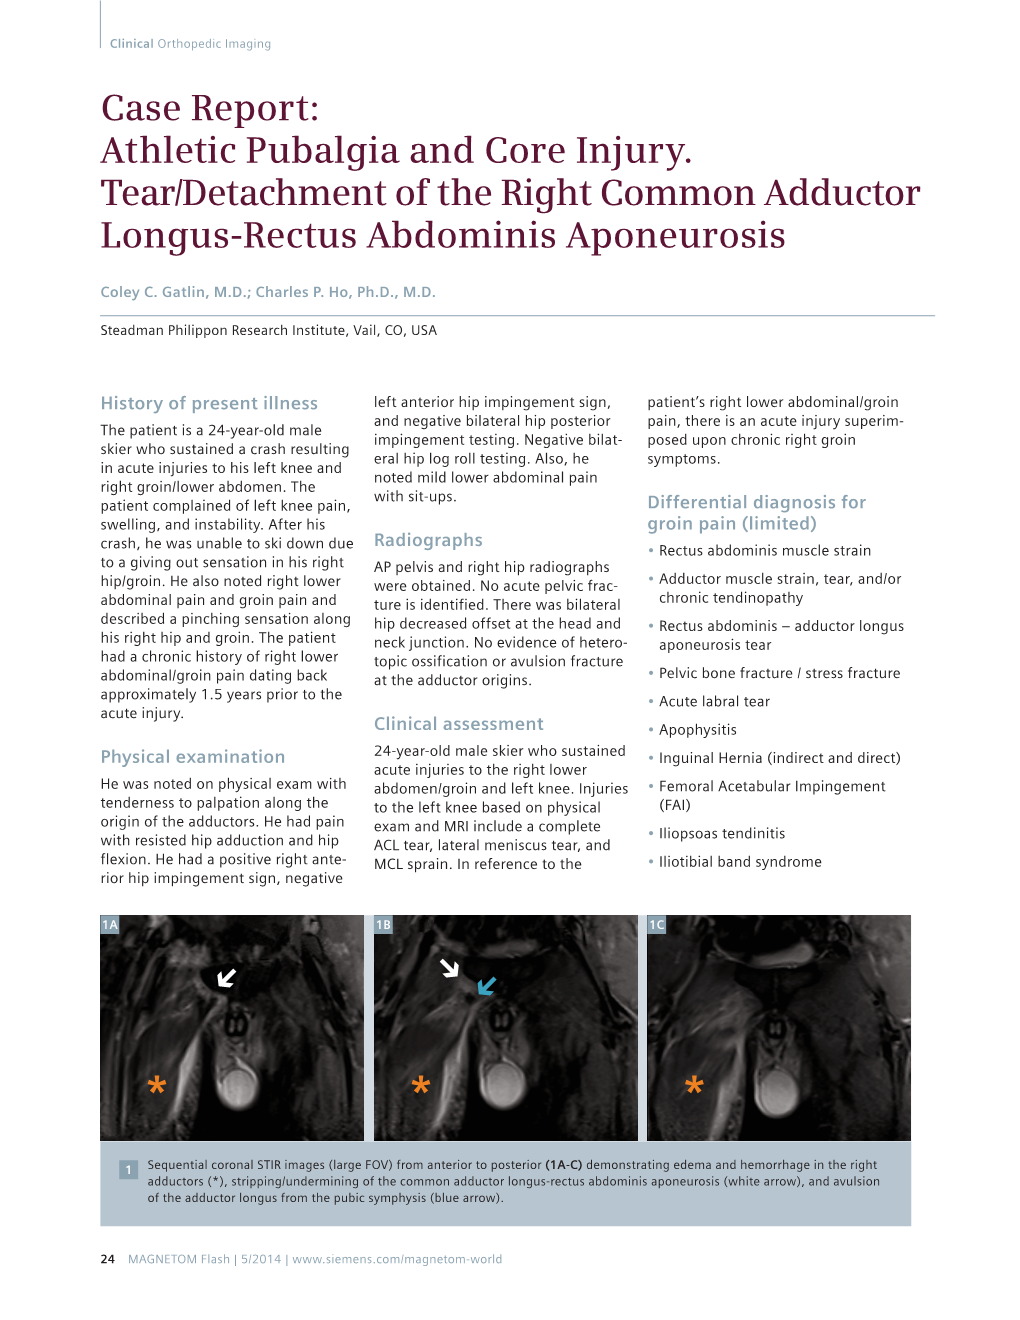 Case Report: Athletic Pubalgia and Core Injury. Tear/Detachment of the Right Common Adductor Longus-Rectus Abdominis Aponeurosis